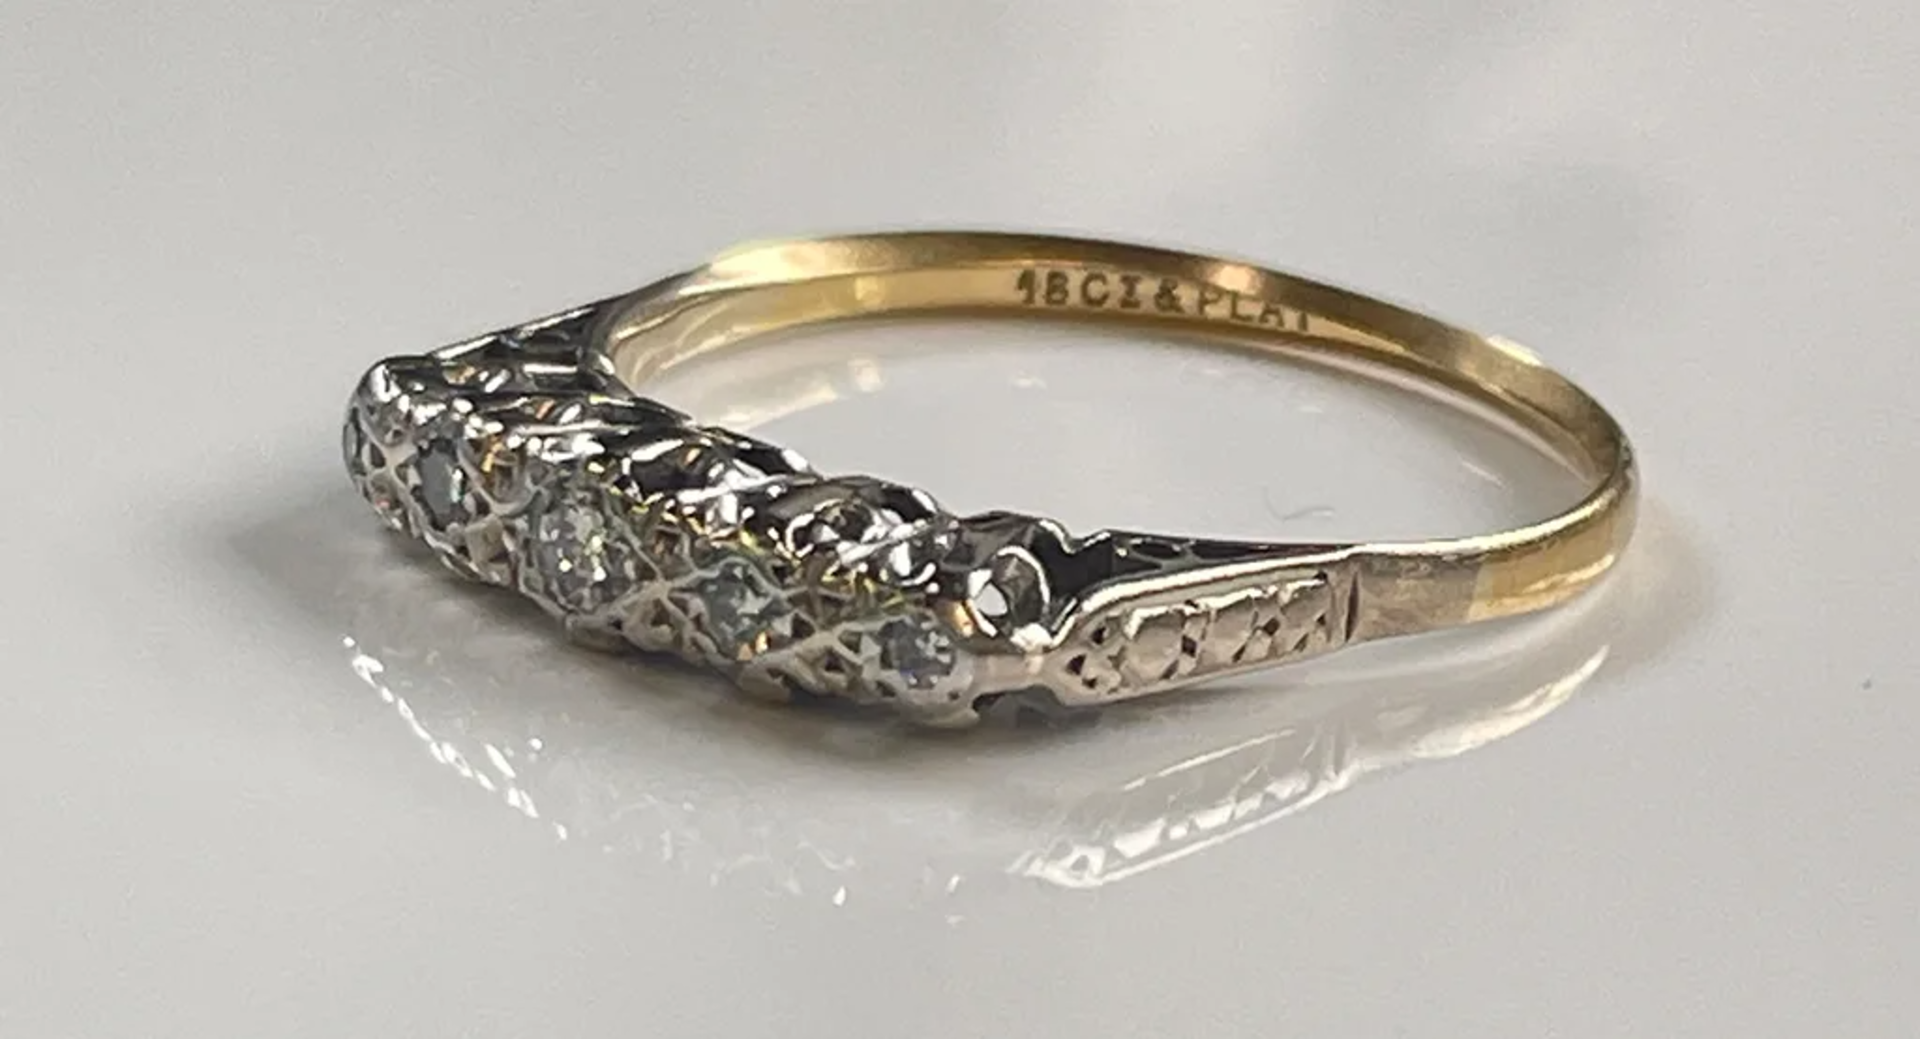 Antique 18K Gold + Platinum Ring with 5 Old Cut Diamonds - Image 2 of 3